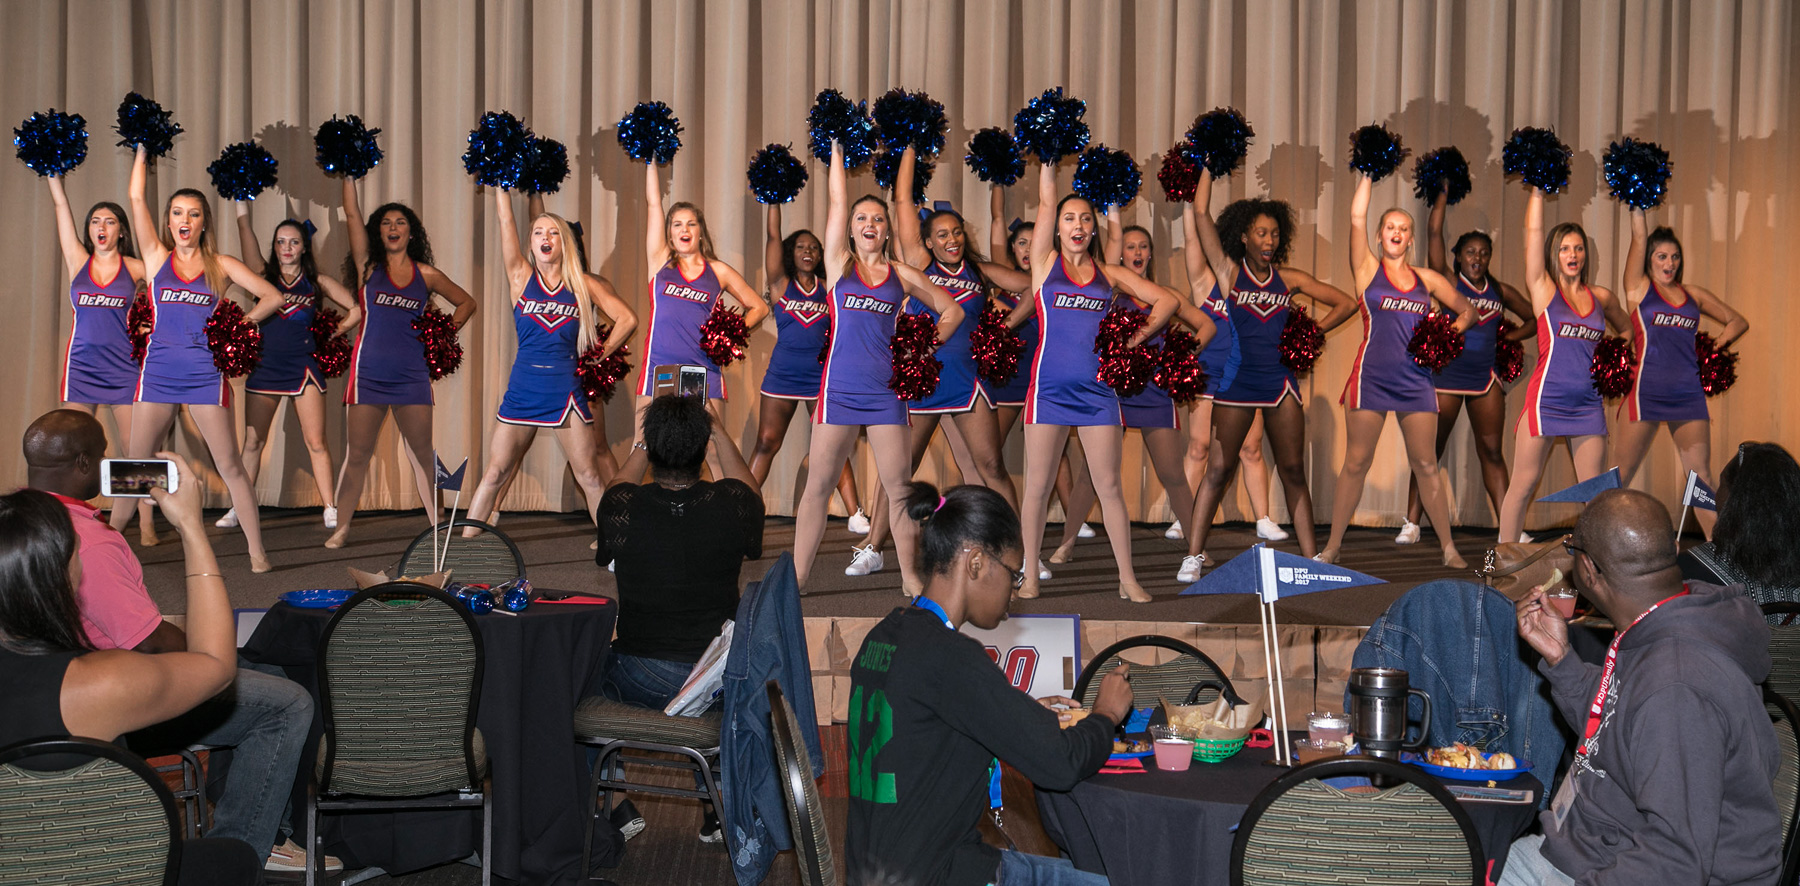 Members of the DePaul University Dance and Cheer Teams perform for students and their families. (DePaul University/Jamie Moncrief)